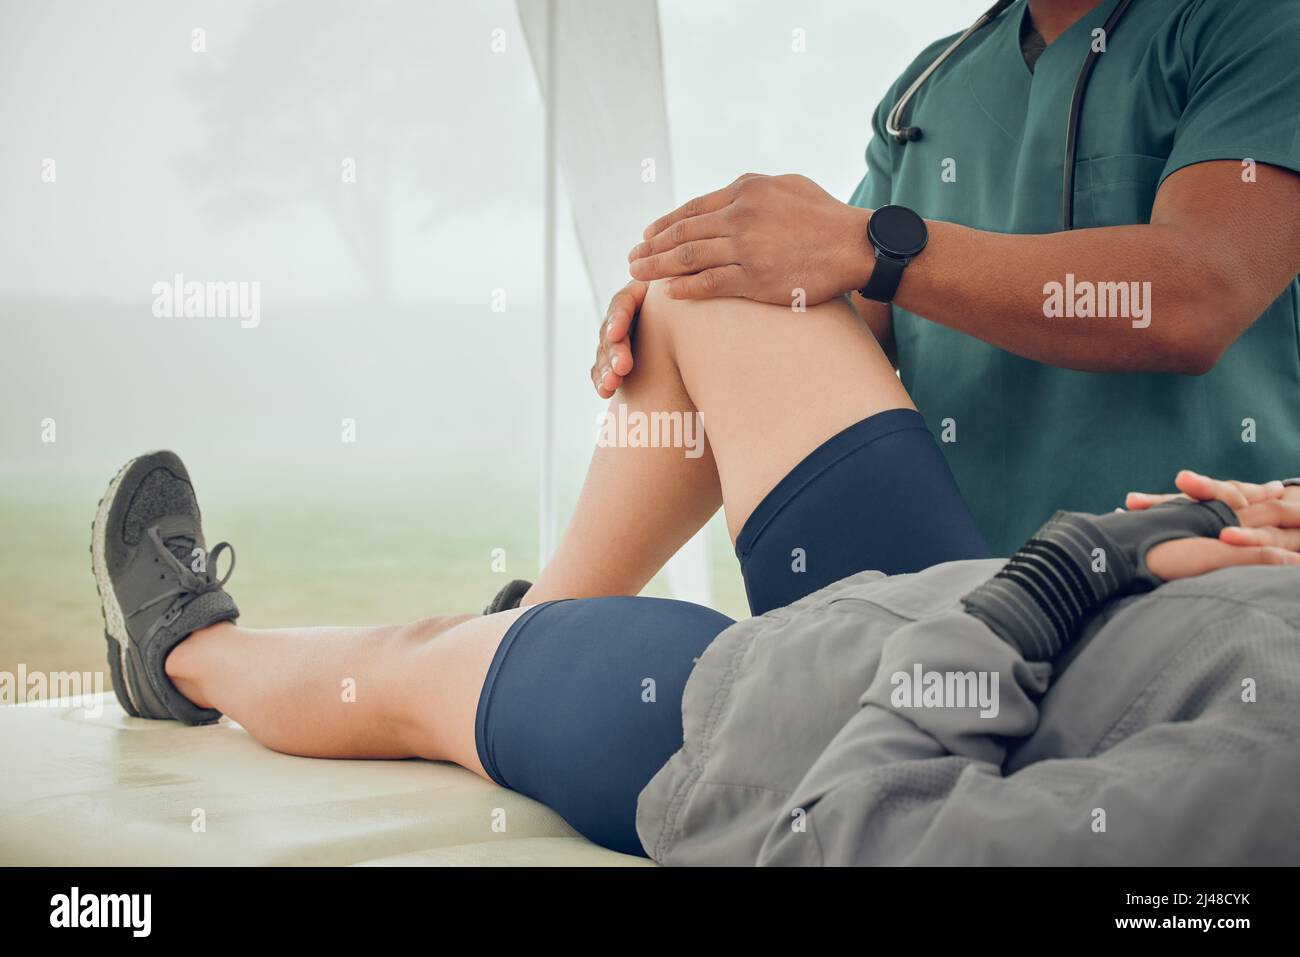 https://c8.alamy.com/comp/2J48CYK/youve-gotta-look-after-your-knees-cropped-shot-of-an-unrecognizable-male-physiotherapist-working-on-a-female-patient-outside-2J48CYK.jpg